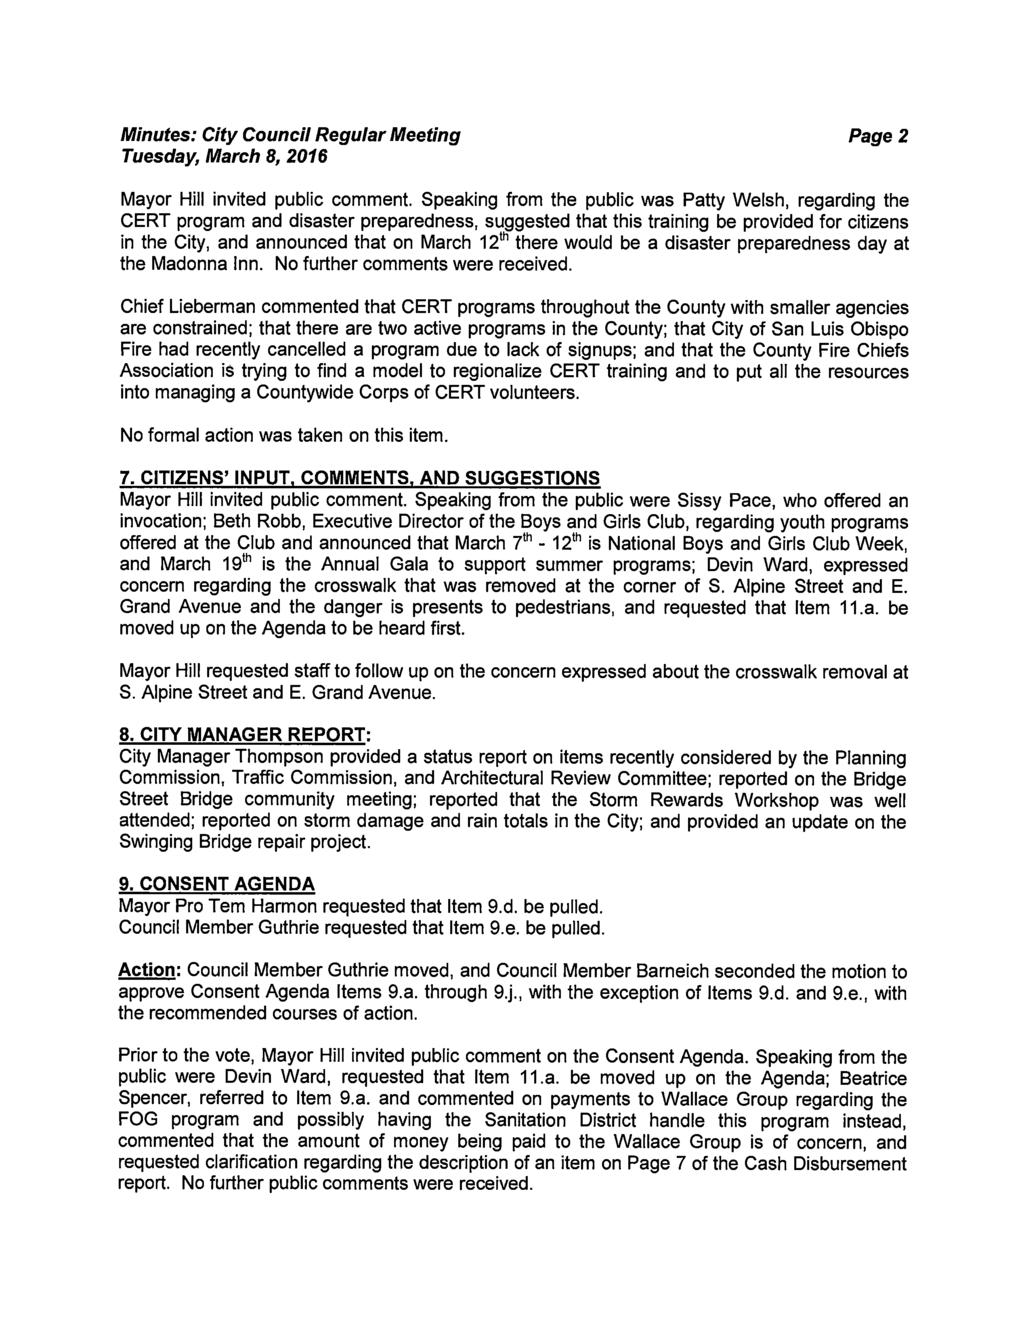 Page2 Mayor Hill invited public comment.